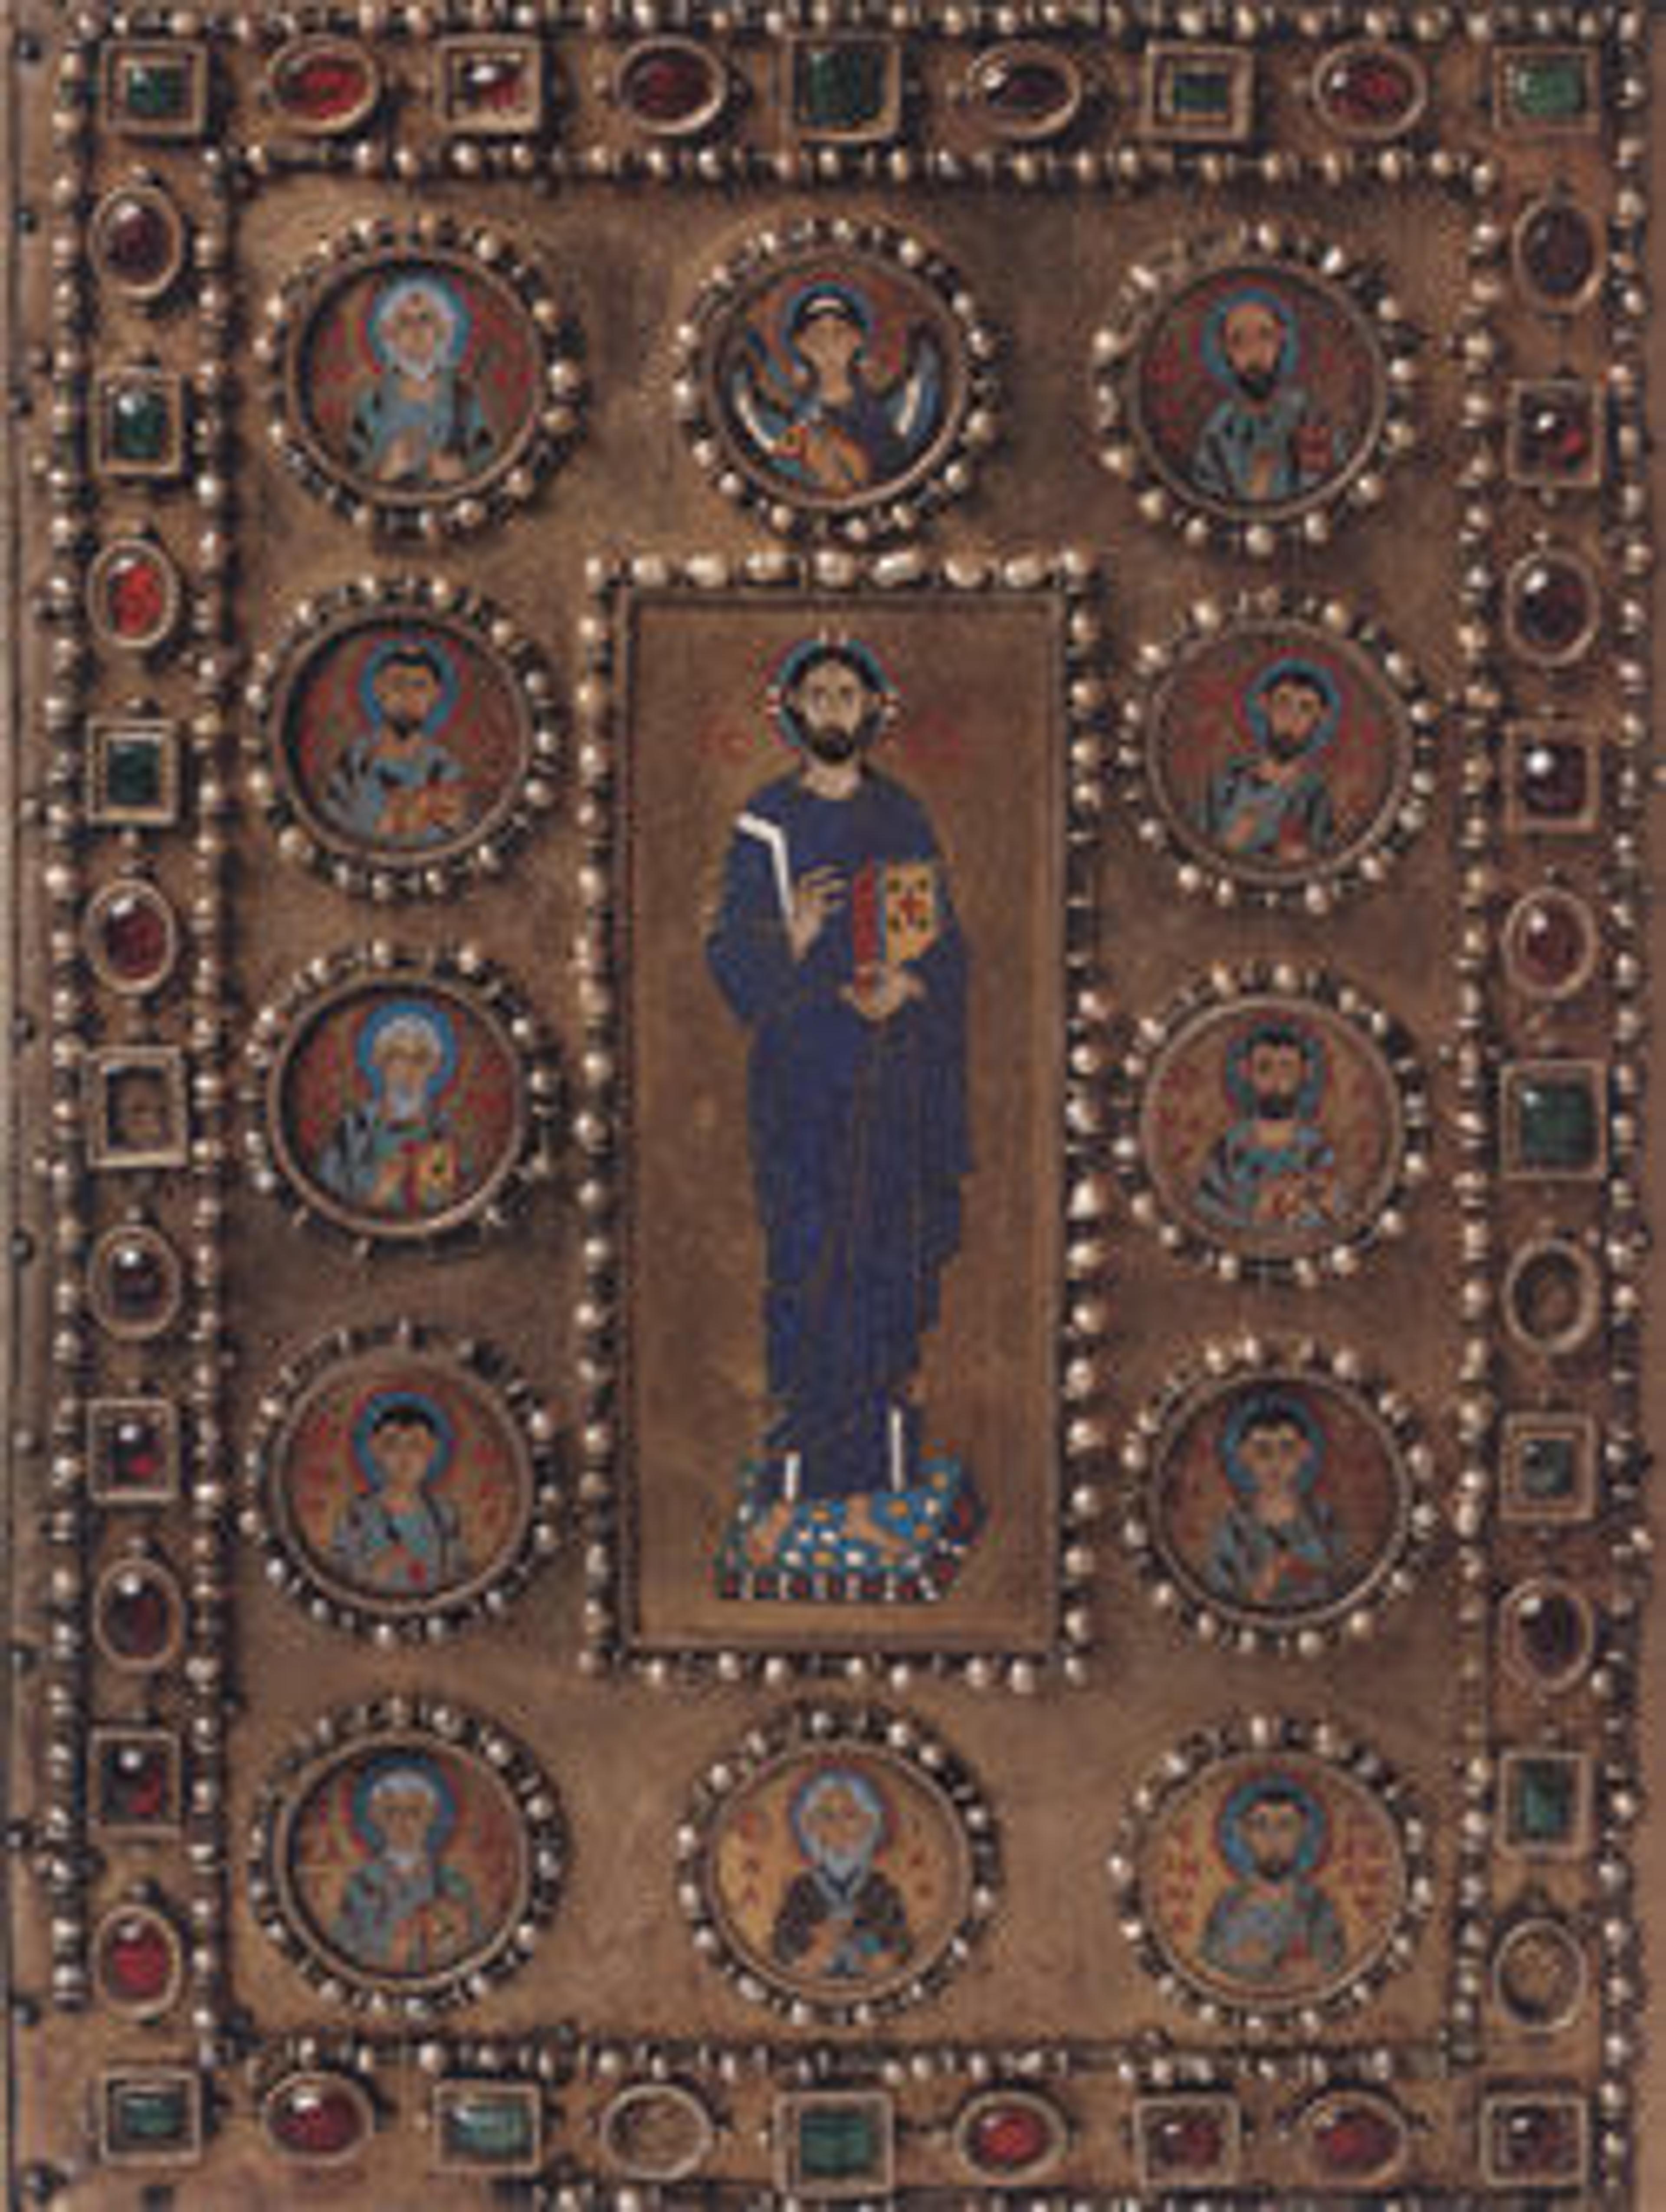 The Glory of Byzantium: Art and Culture of the Middle Byzantine Era, A.D. 843-1261